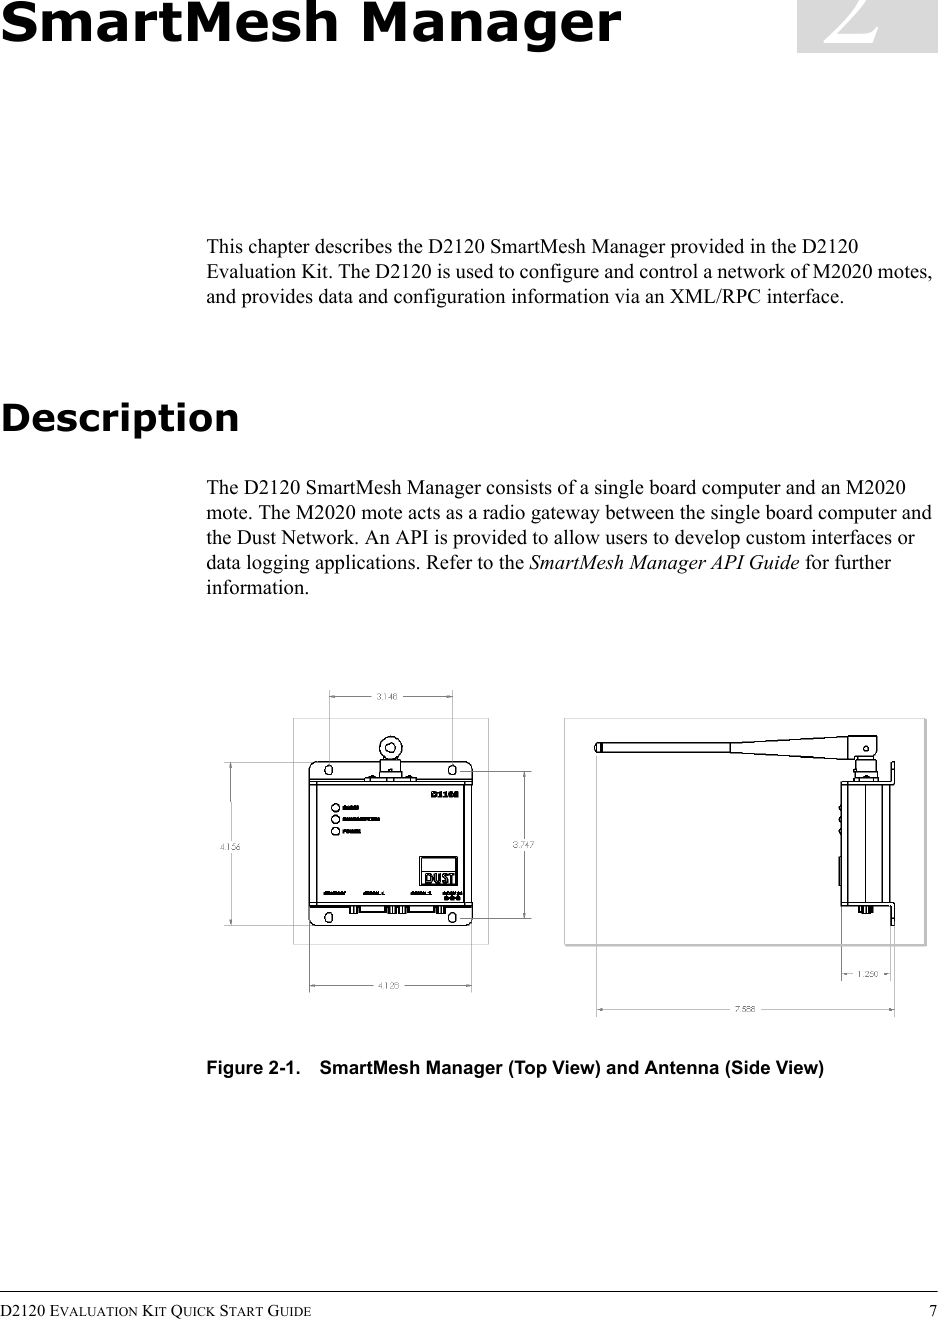 D2120 EVALUATION KIT QUICK START GUIDE 72SmartMesh ManagerThis chapter describes the D2120 SmartMesh Manager provided in the D2120 Evaluation Kit. The D2120 is used to configure and control a network of M2020 motes, and provides data and configuration information via an XML/RPC interface.DescriptionThe D2120 SmartMesh Manager consists of a single board computer and an M2020 mote. The M2020 mote acts as a radio gateway between the single board computer and the Dust Network. An API is provided to allow users to develop custom interfaces or data logging applications. Refer to the SmartMesh Manager API Guide for further information.Figure 2-1. SmartMesh Manager (Top View) and Antenna (Side View)